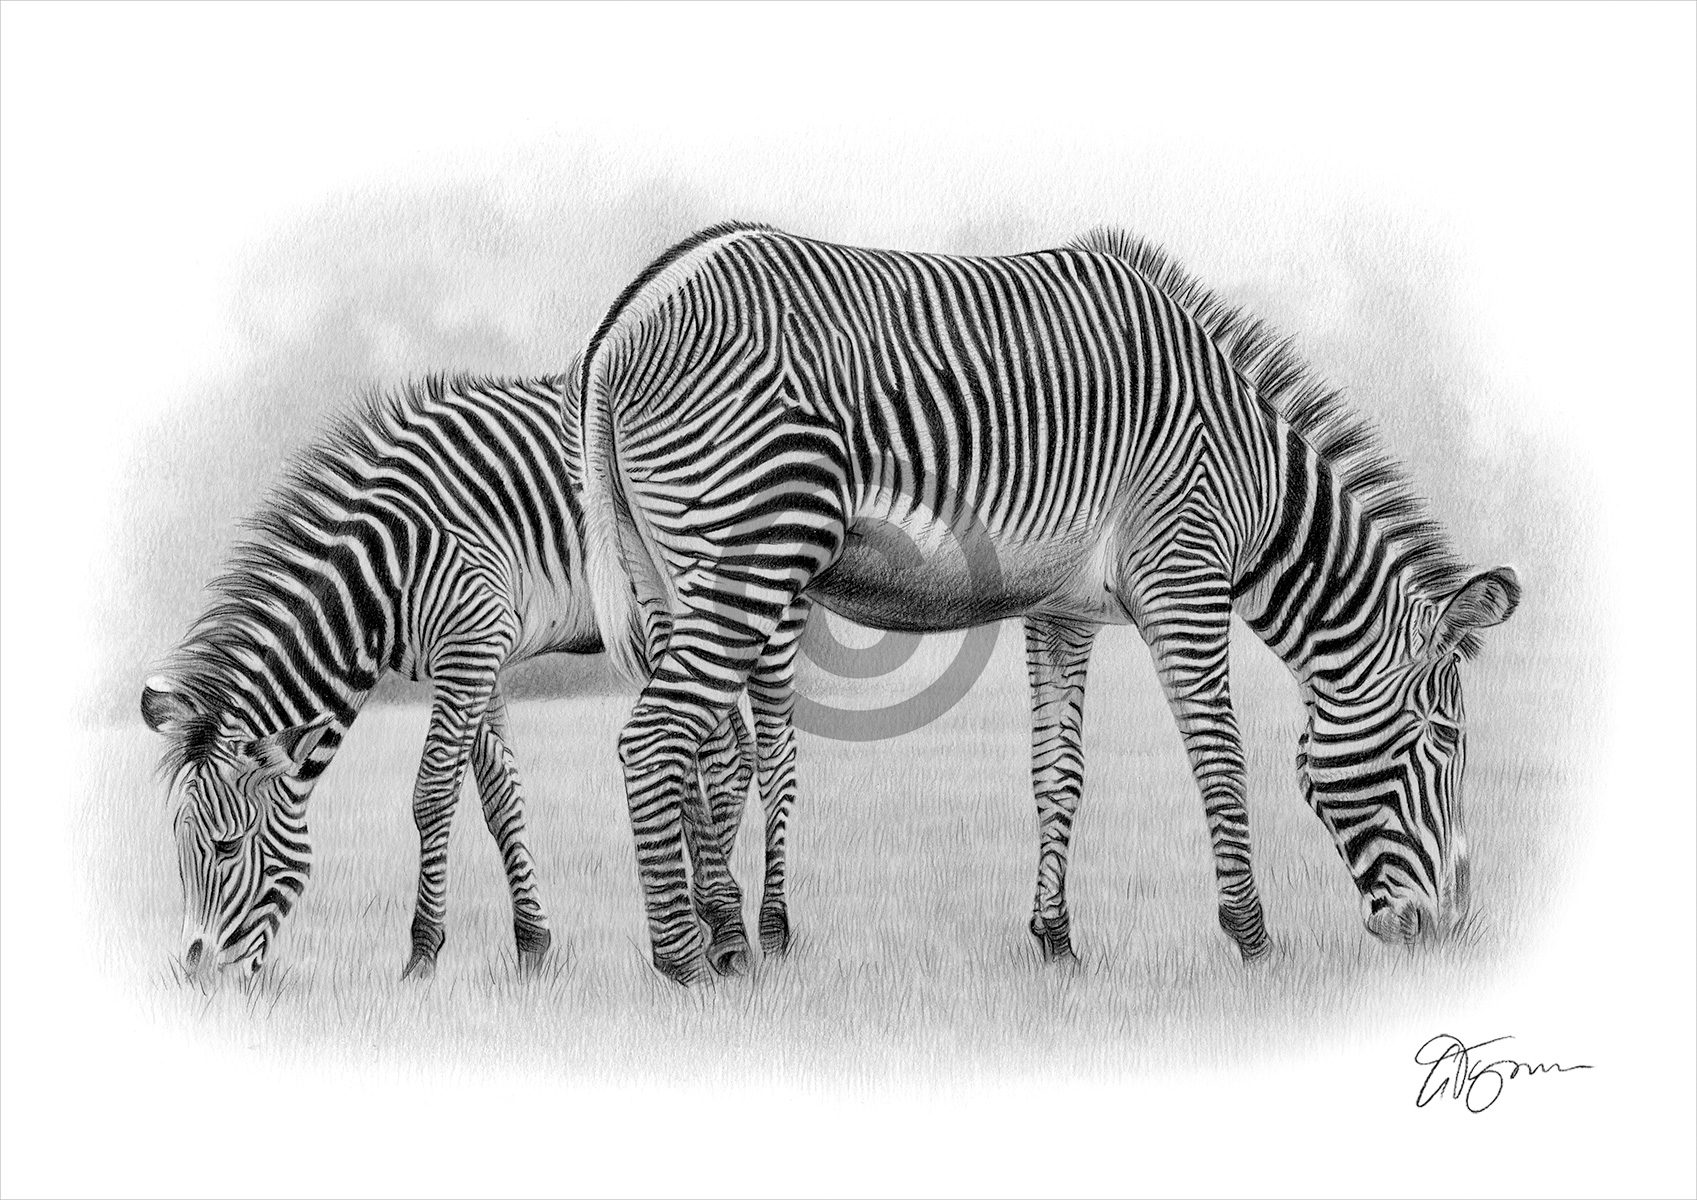 Pencil drawing of two Zebras grazing by artist Gary Tymon